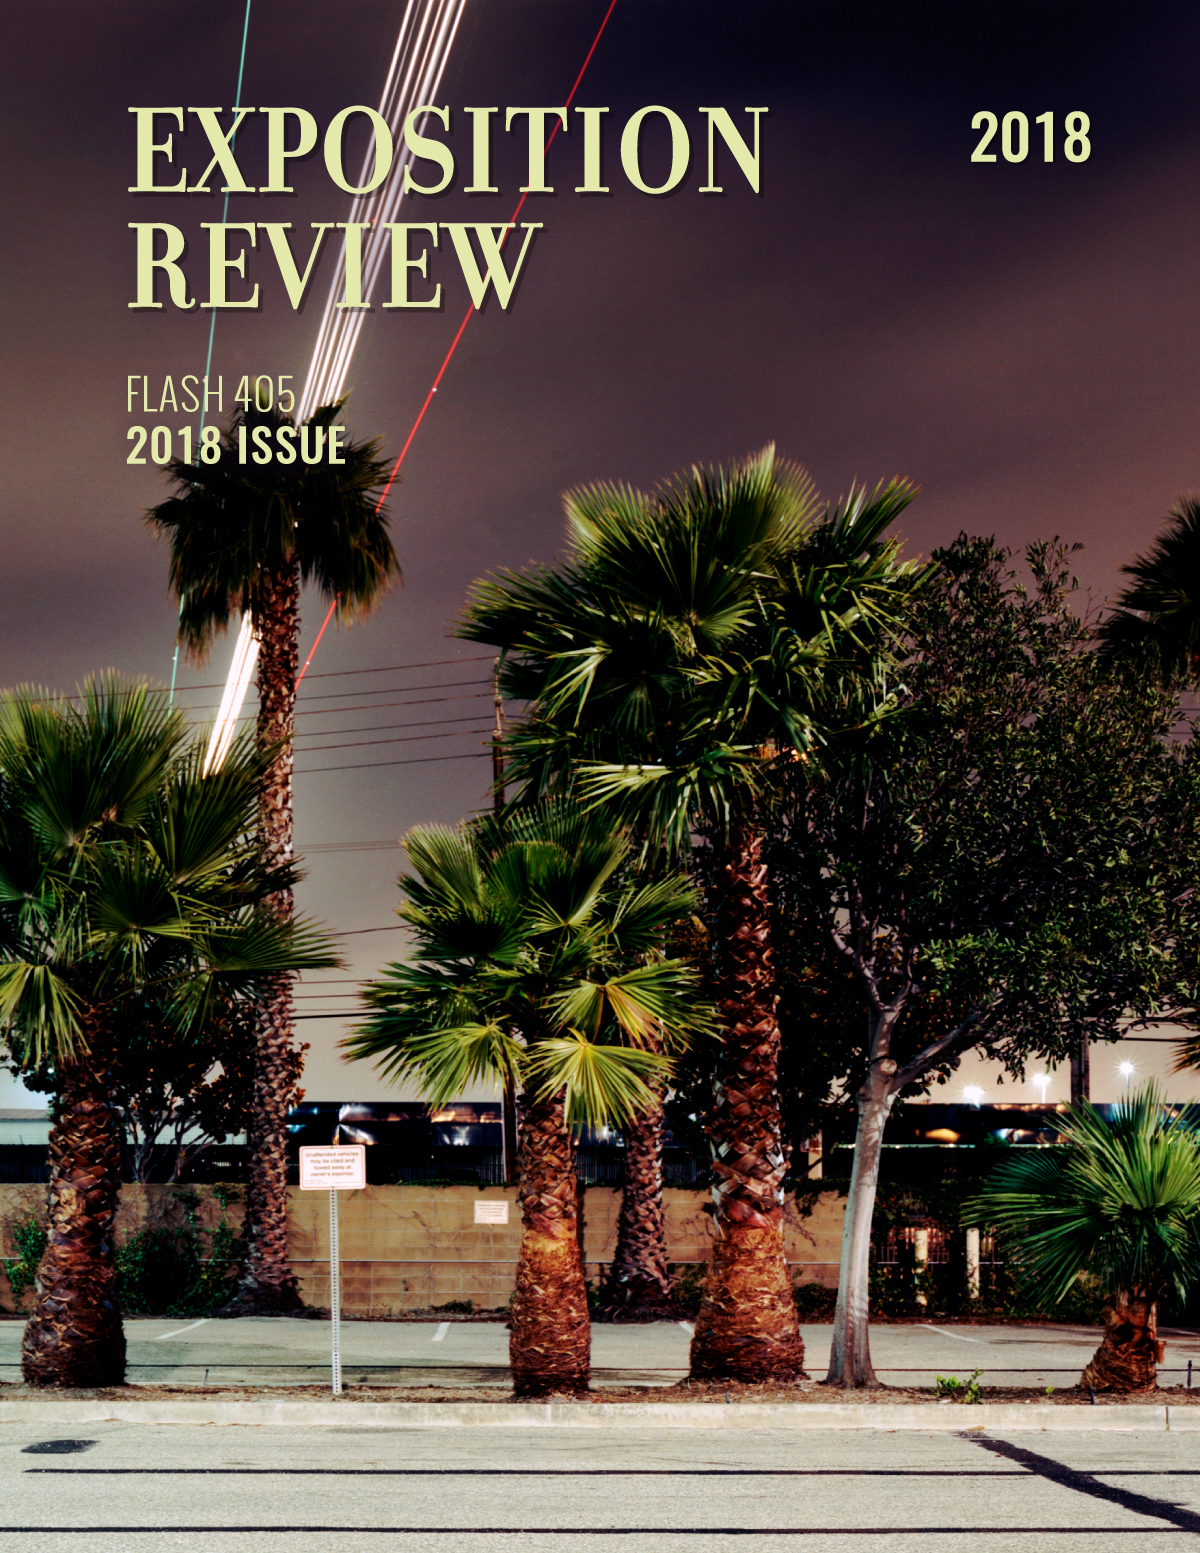 Exposition Review Flash 405 2018 Issue